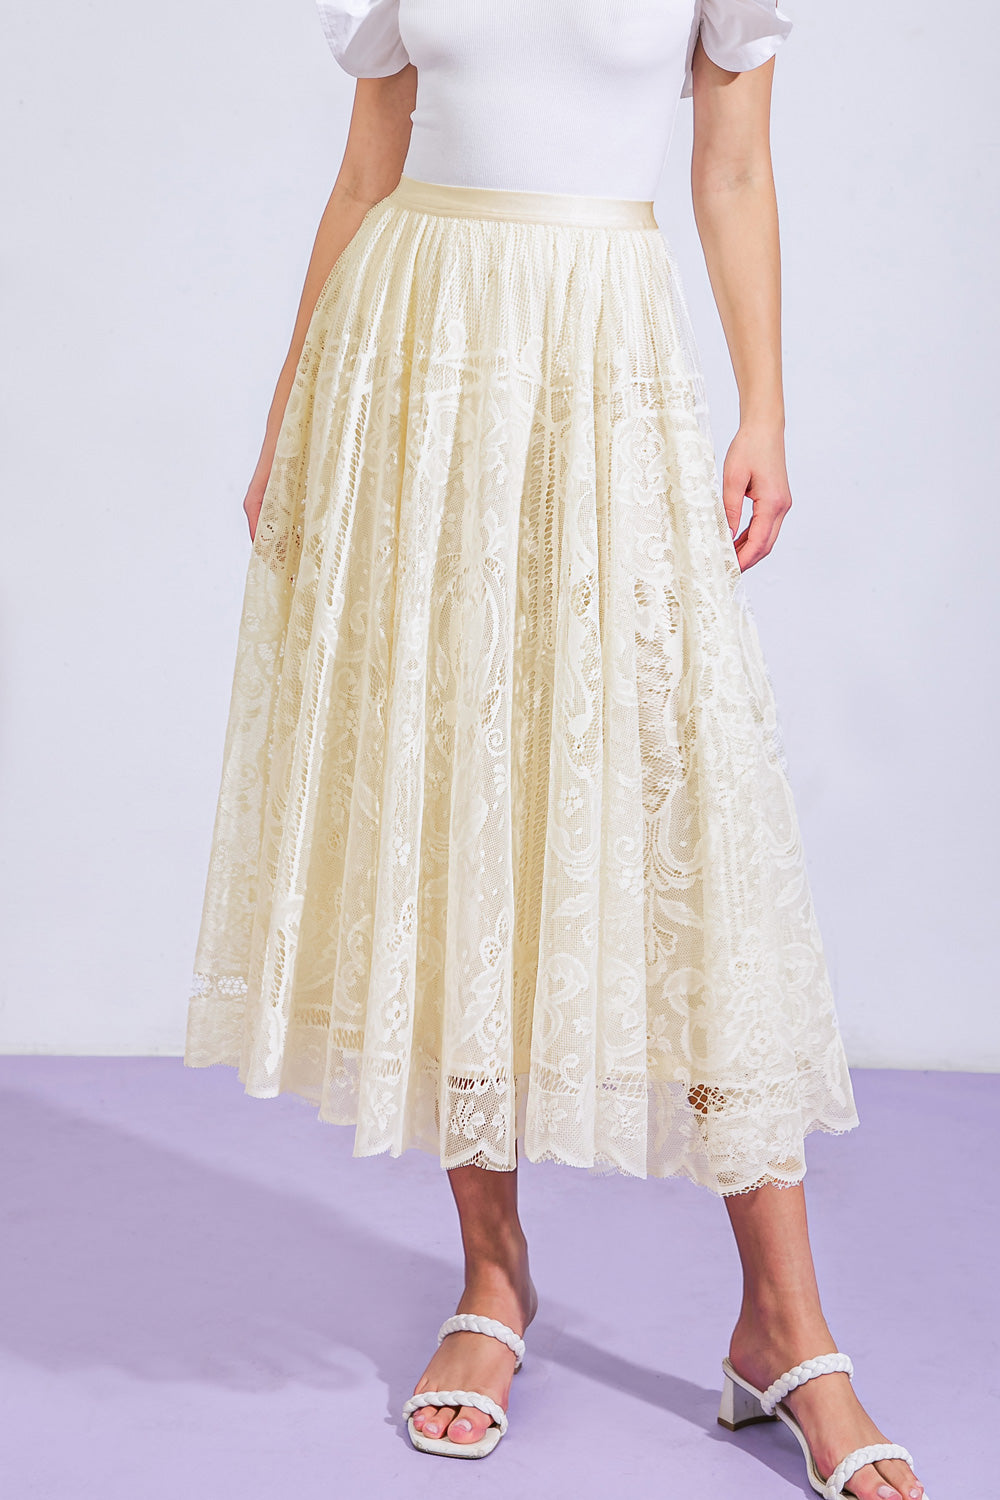 MEANINGFUL MOMENT WOVEN LACE MIDI SKIRT